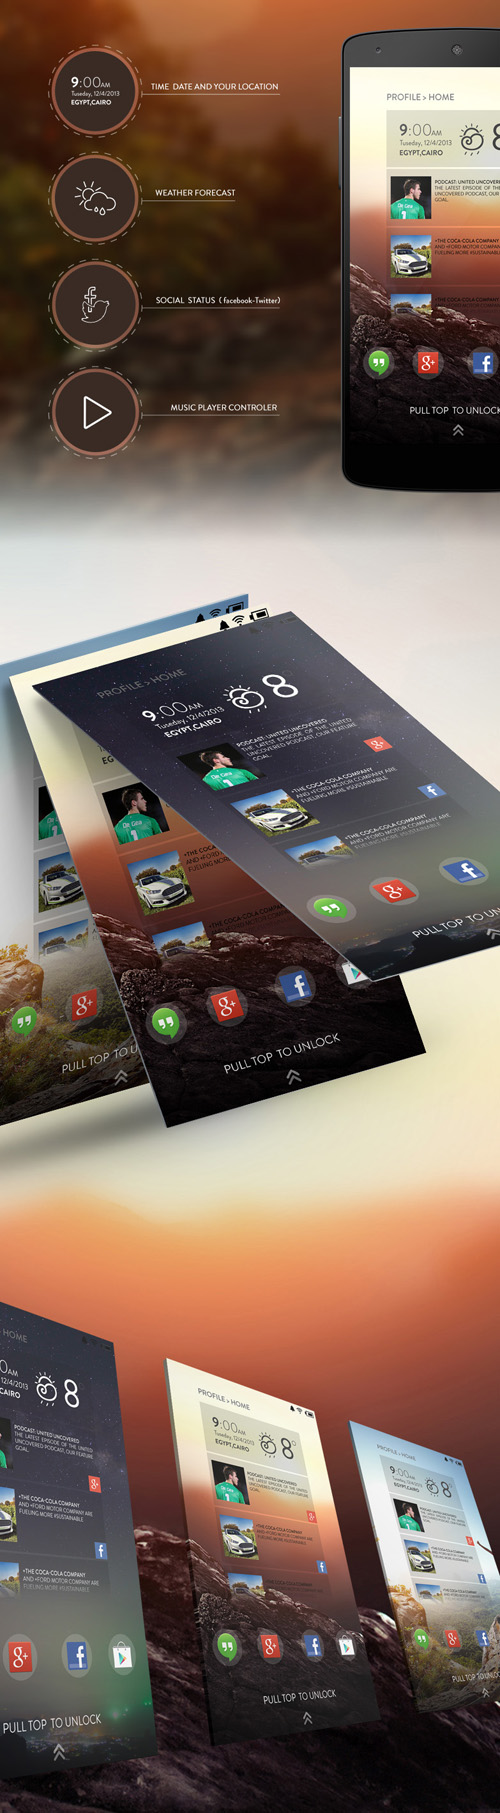 Android Lock-screen UI Design Concepts to Boost User Experience